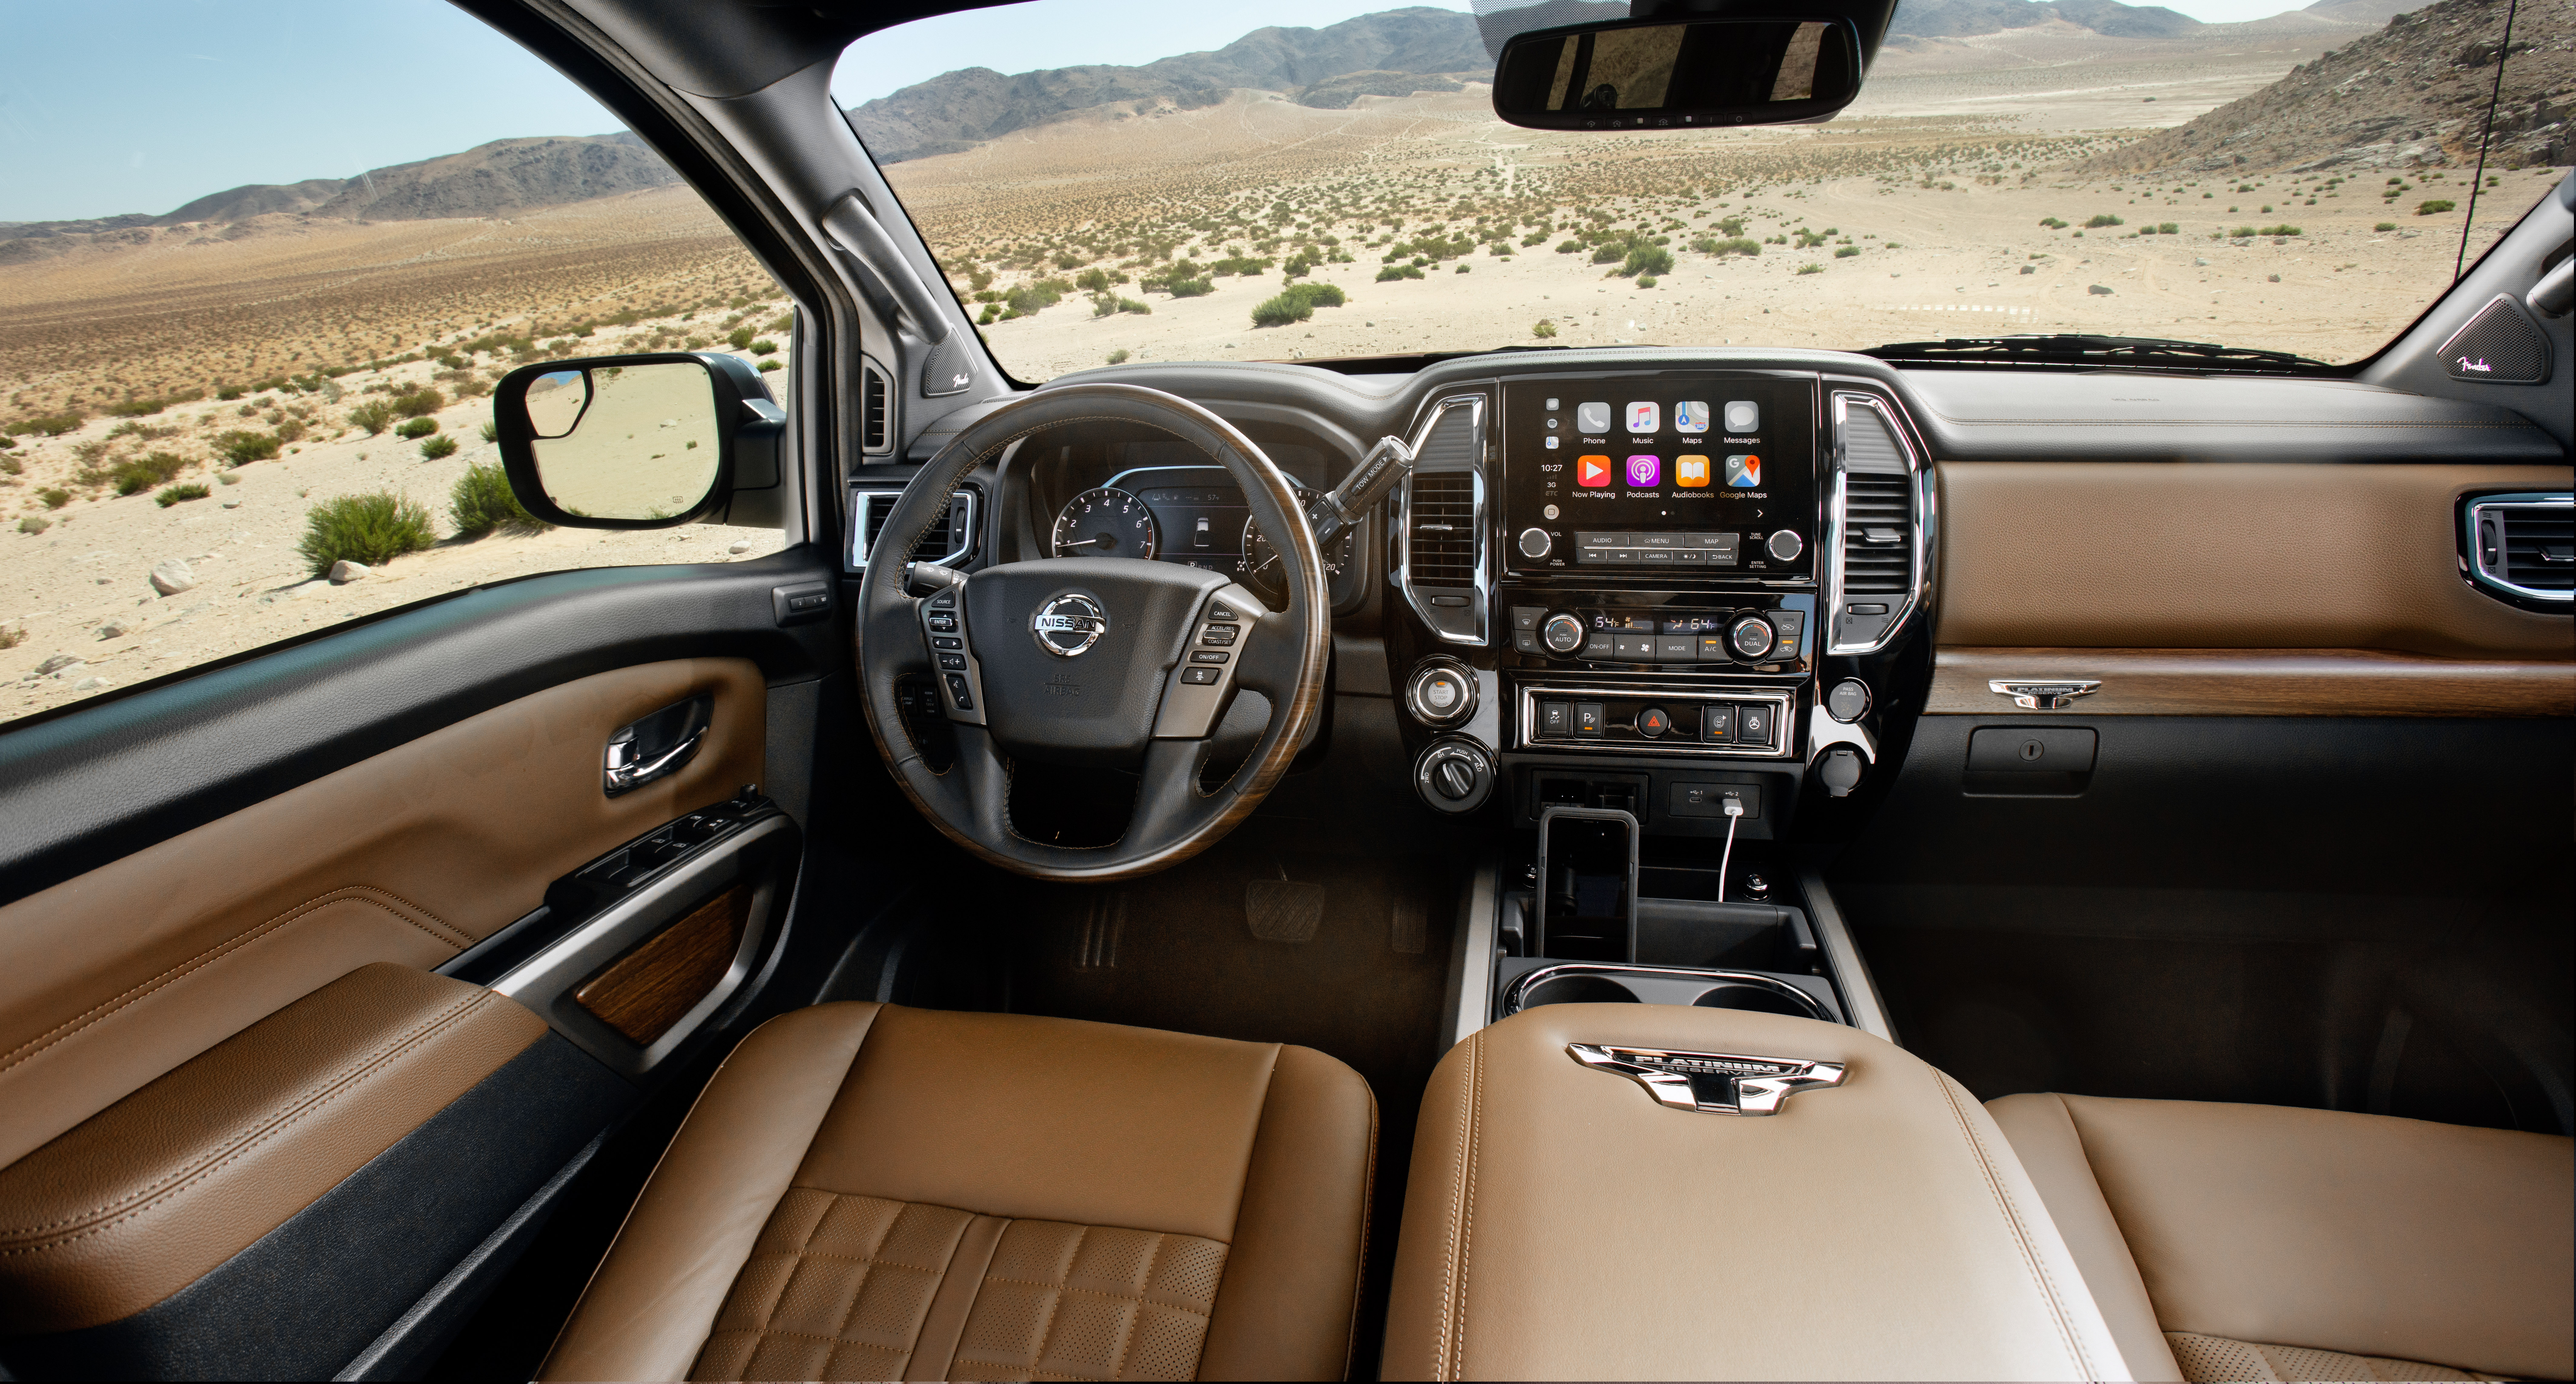 Refreshed Nissan Titan Gets More Tech New Look Wardsauto